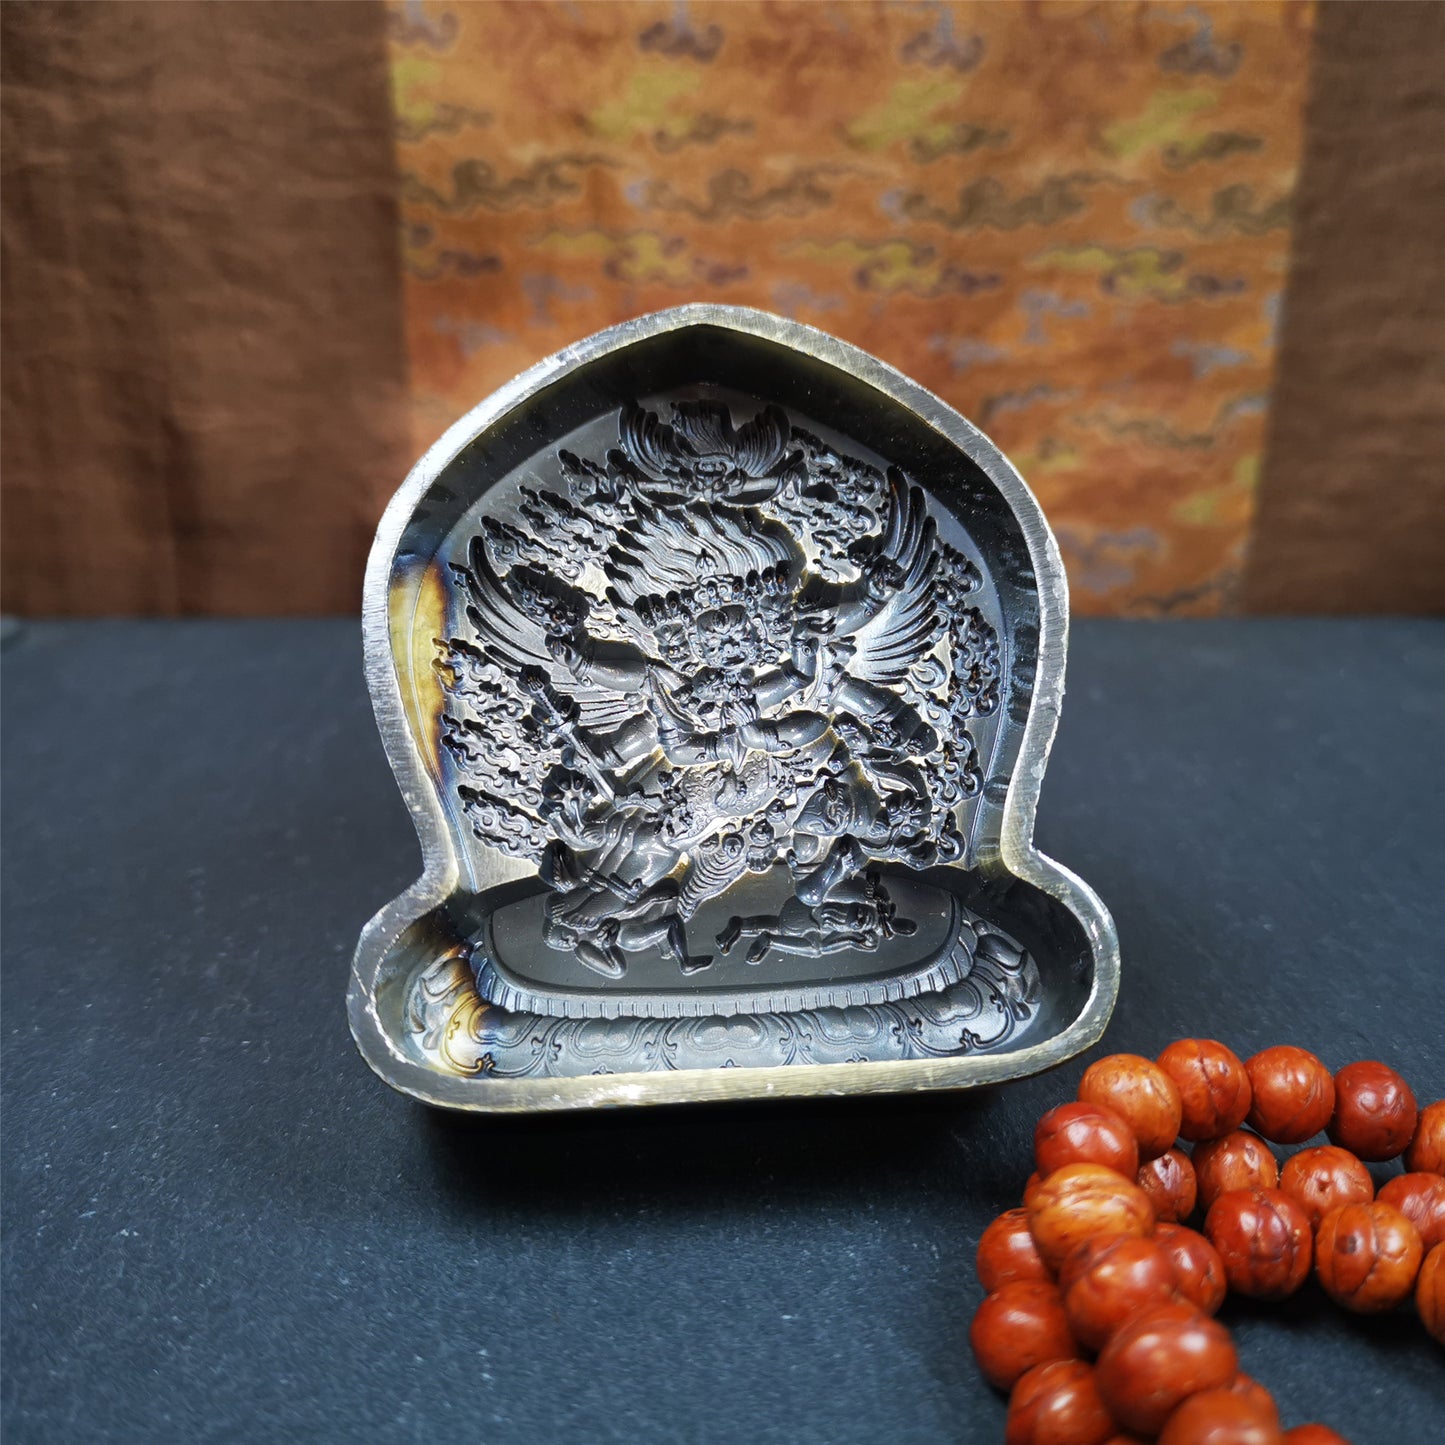 This Vajrakilaya Tsa-Tsa is made by Tibetan craftsmen in Hepo Town, Baiyu County. It is made of brass,yellow color,the shaple is Vajrakilaya,about 2.8inches height. With this mold, you can use clay to make your own Buddha statue.